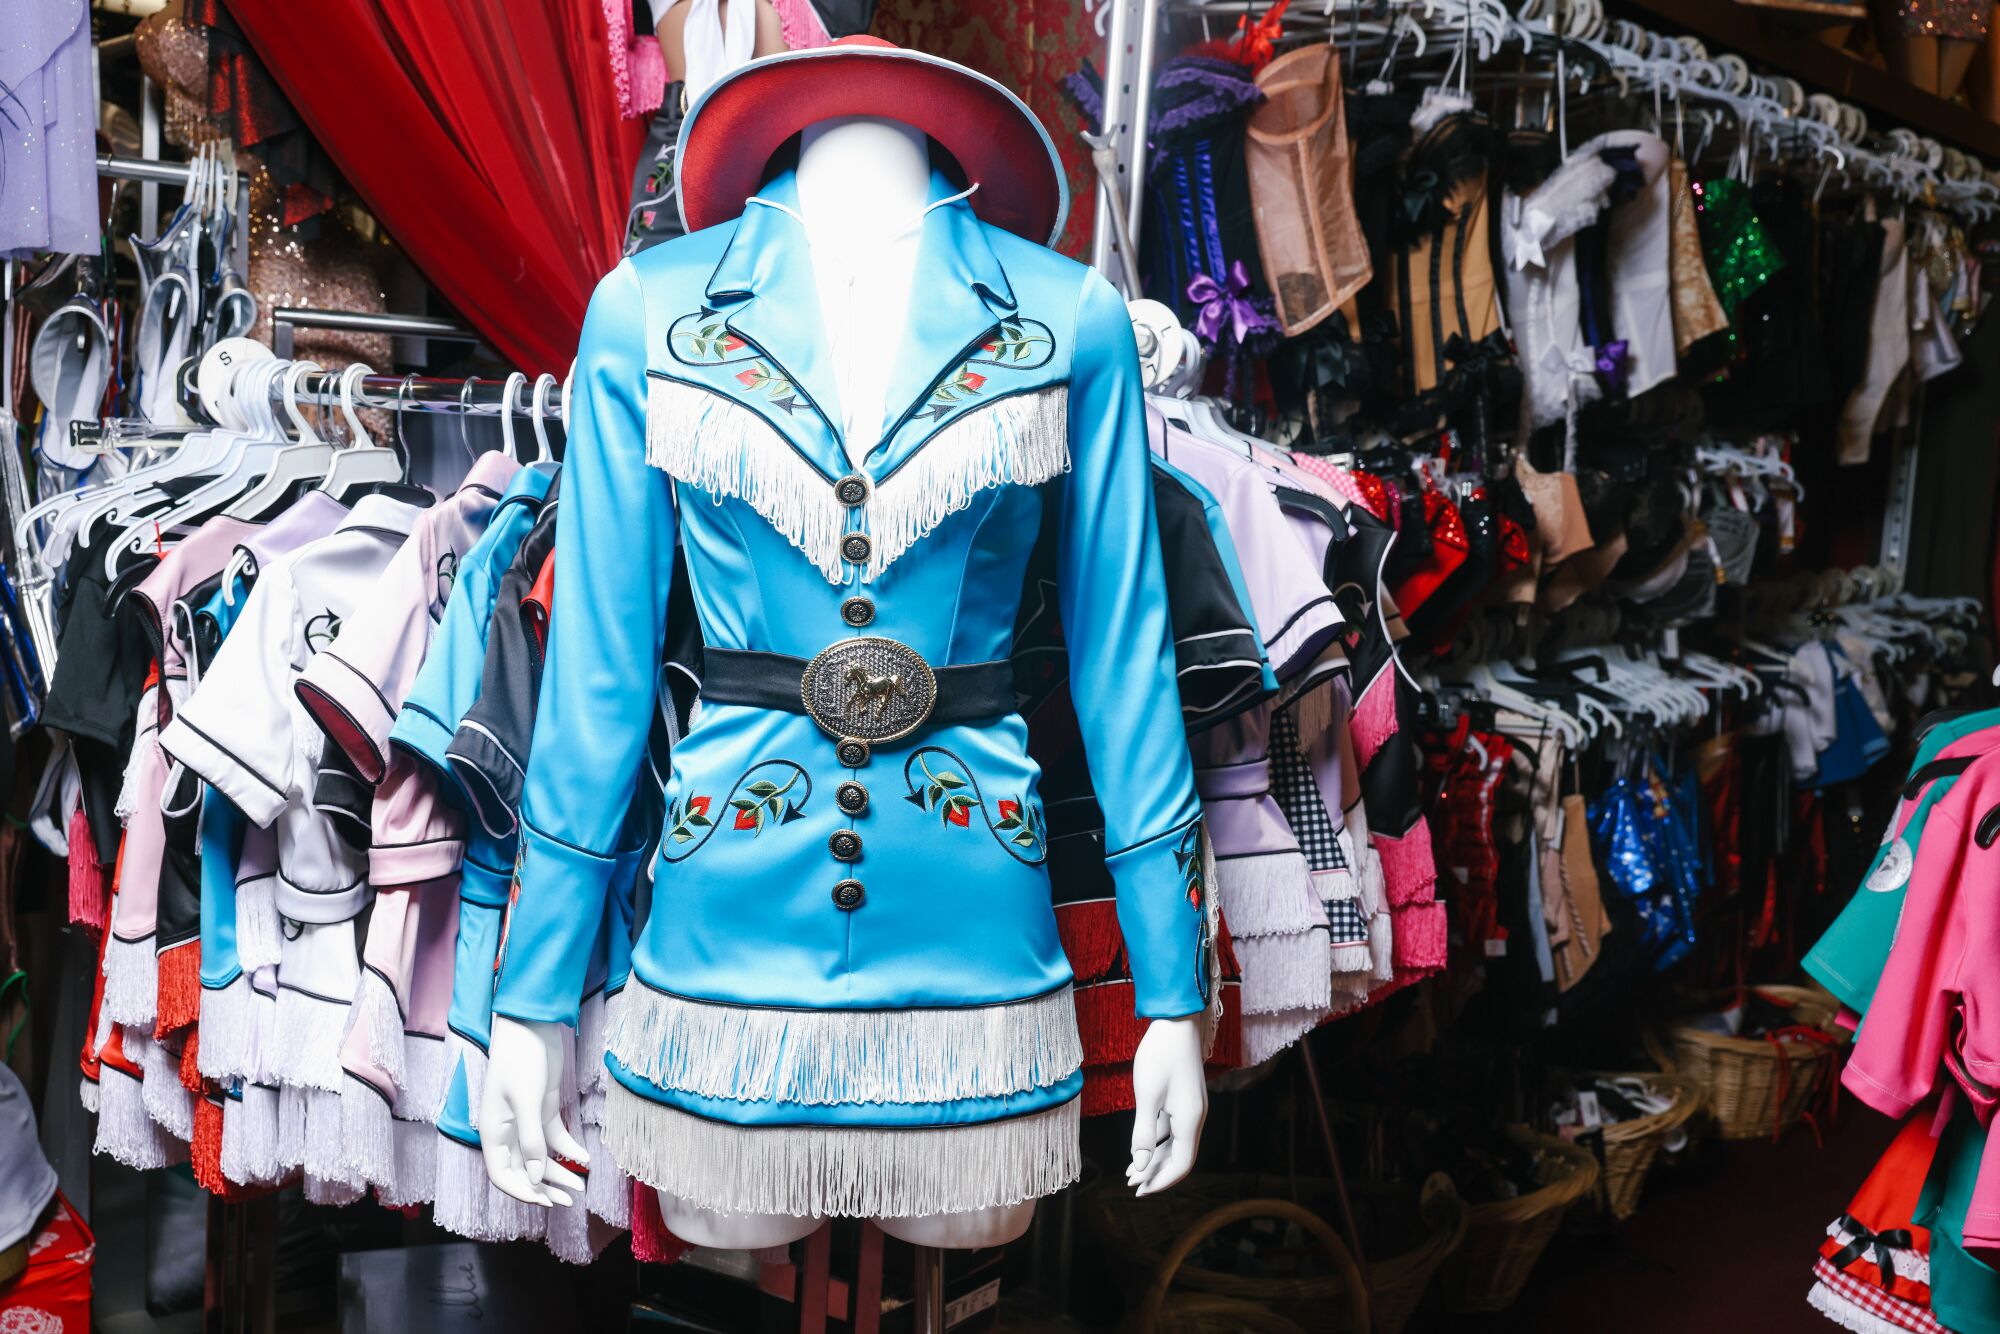 A blue western-themed costume on a mannequin.